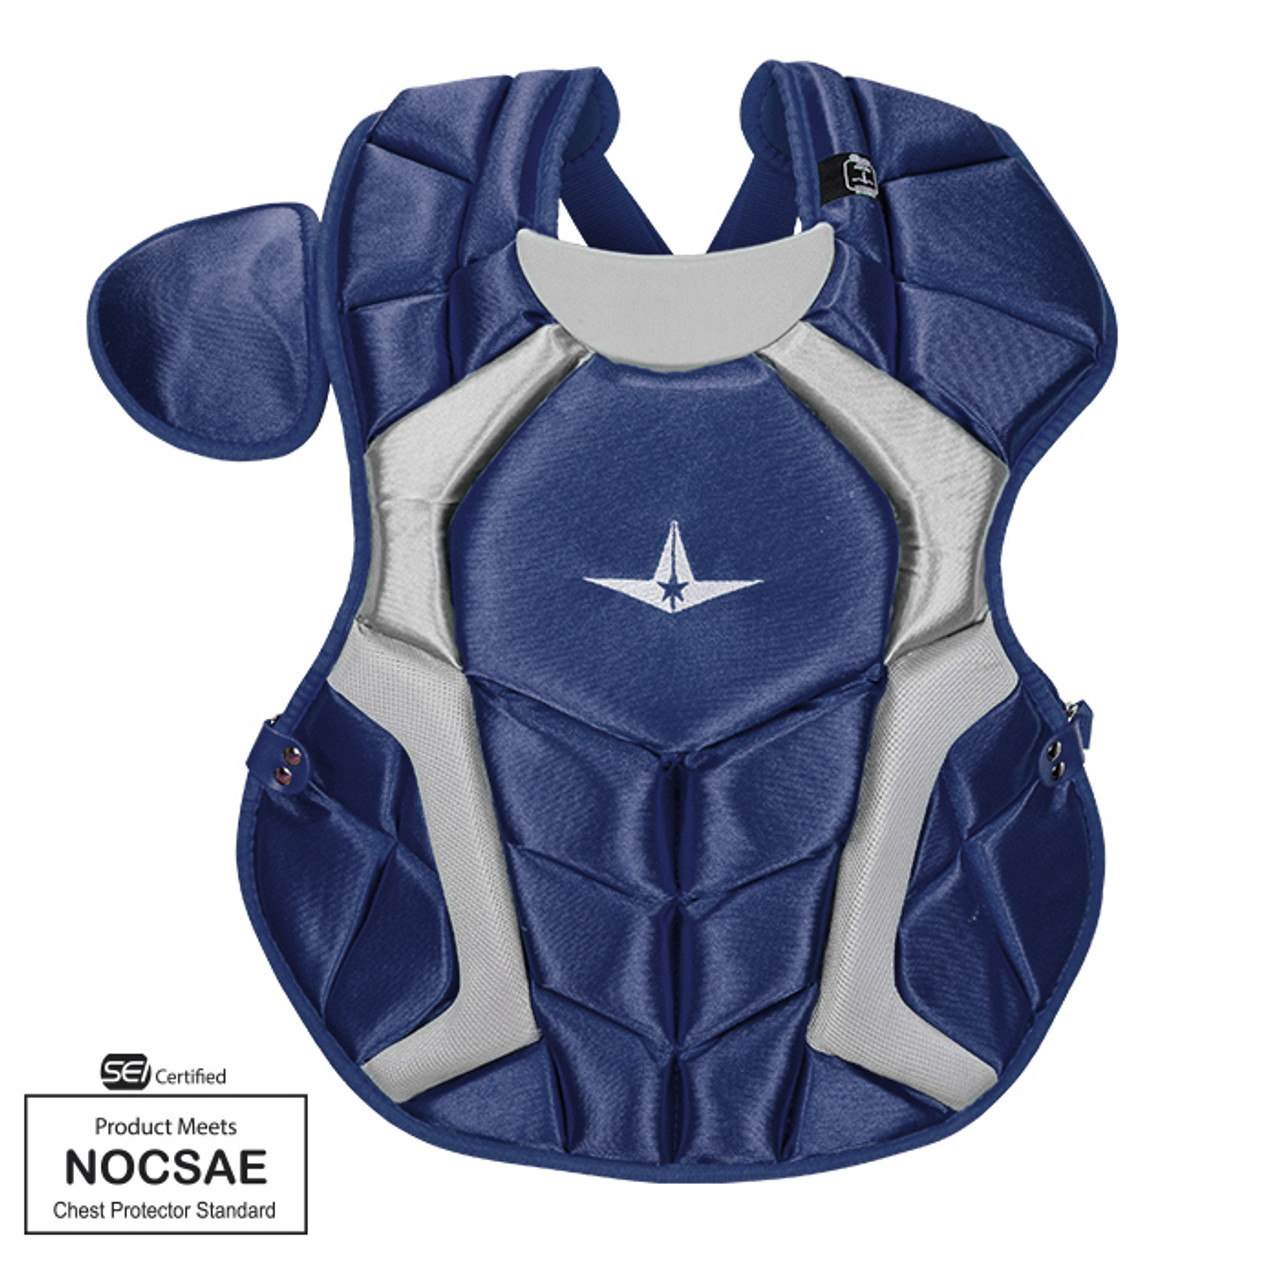 Youth Catcher's Gear Recommendations, Ratings, Options